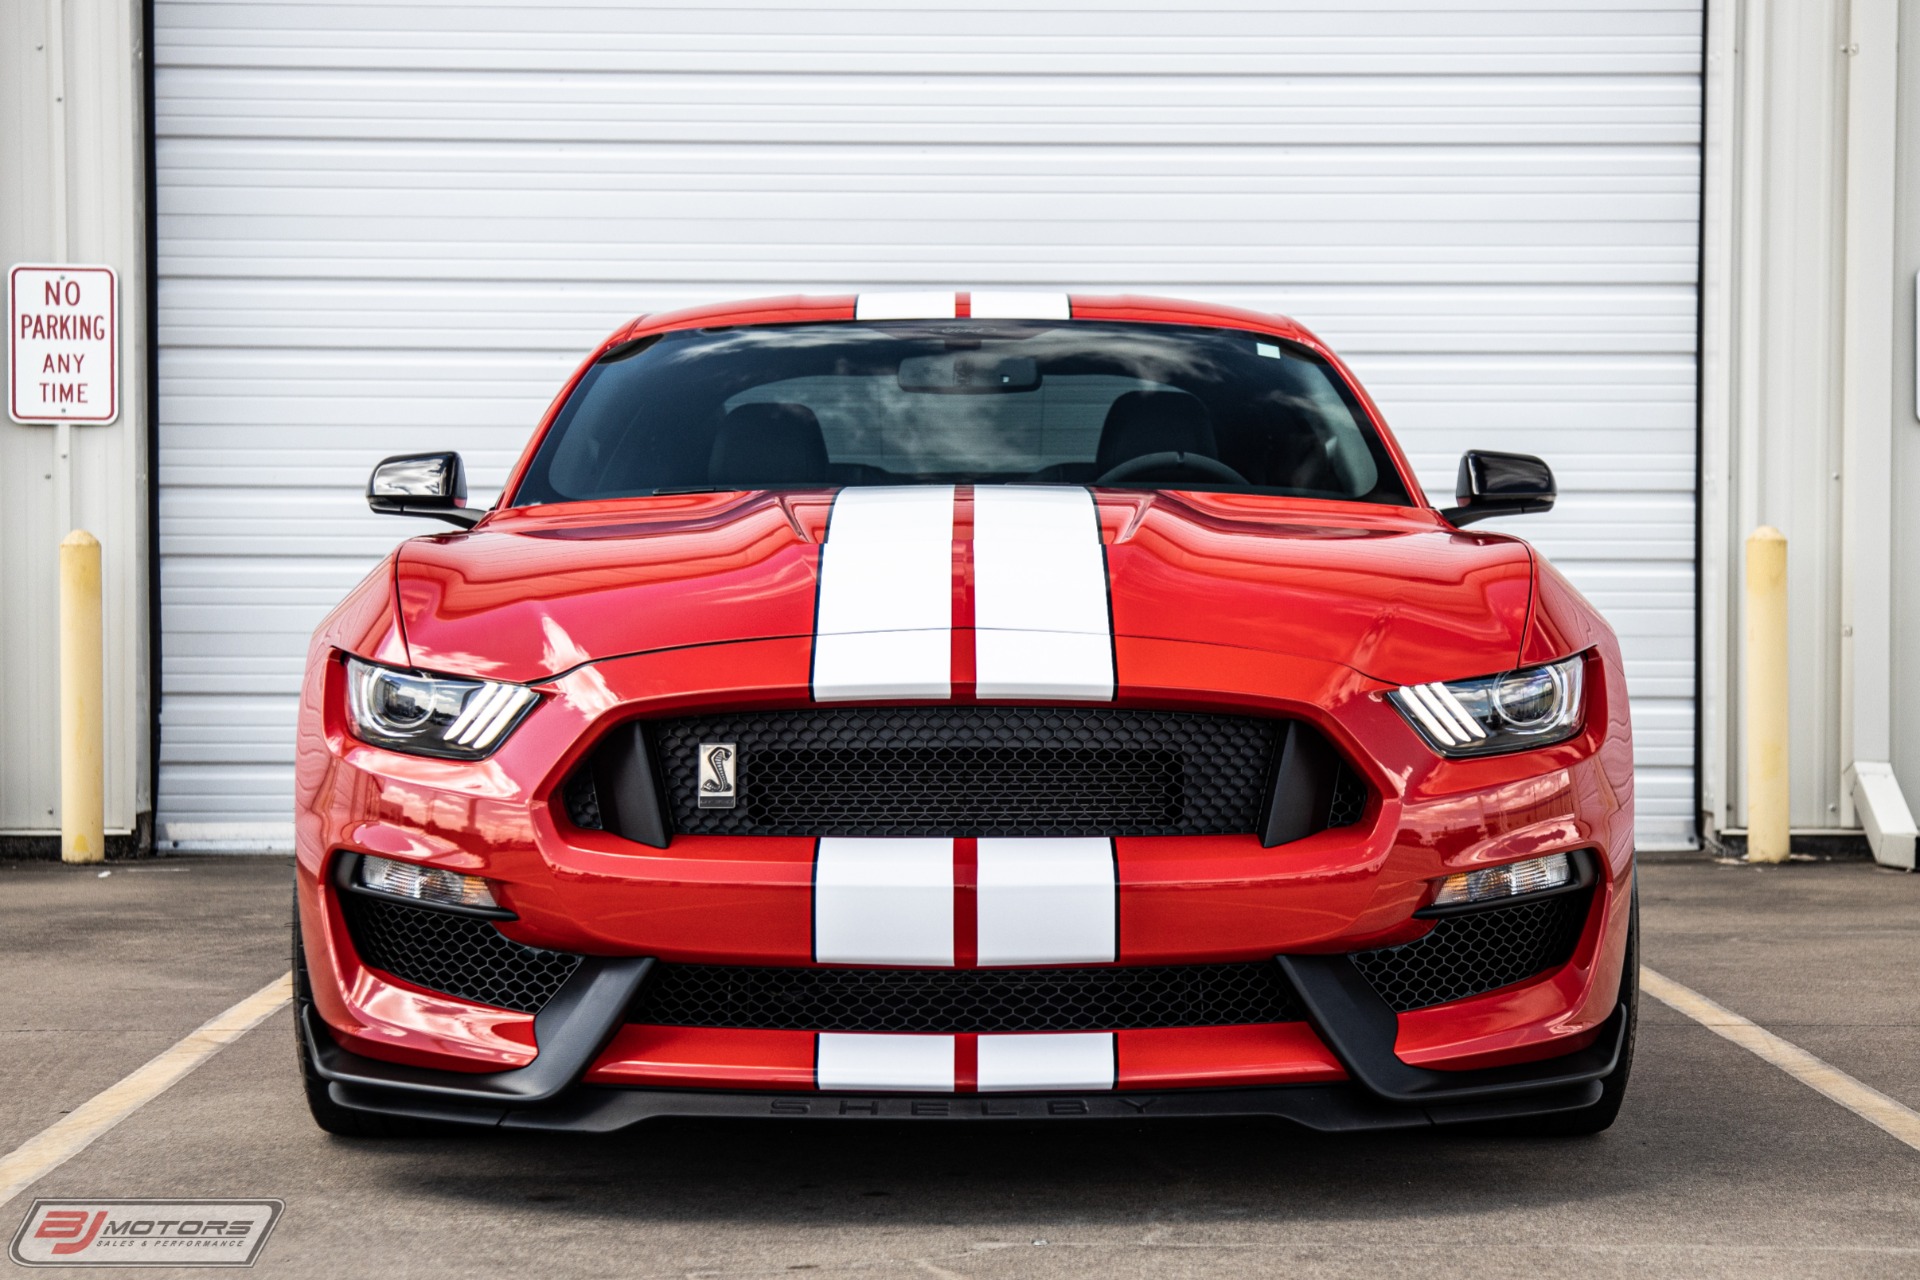 Used-2016-Ford-Mustang-Shelby-GT350.jpg